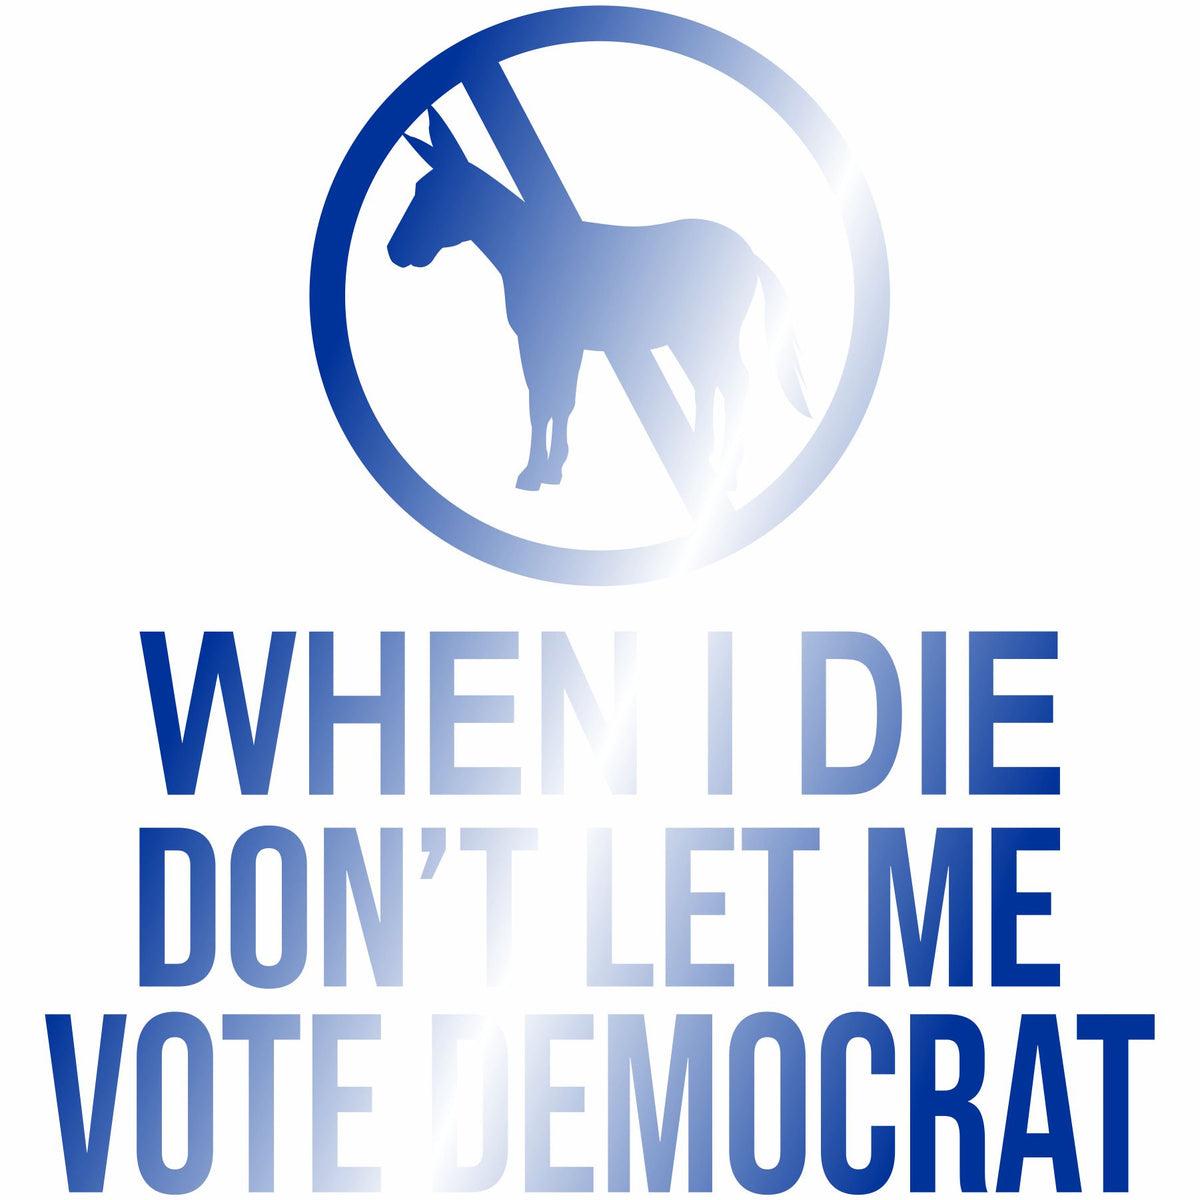 When I Die Don't Let Me Vote Democrat - Vinyl Decal - Free Shipping